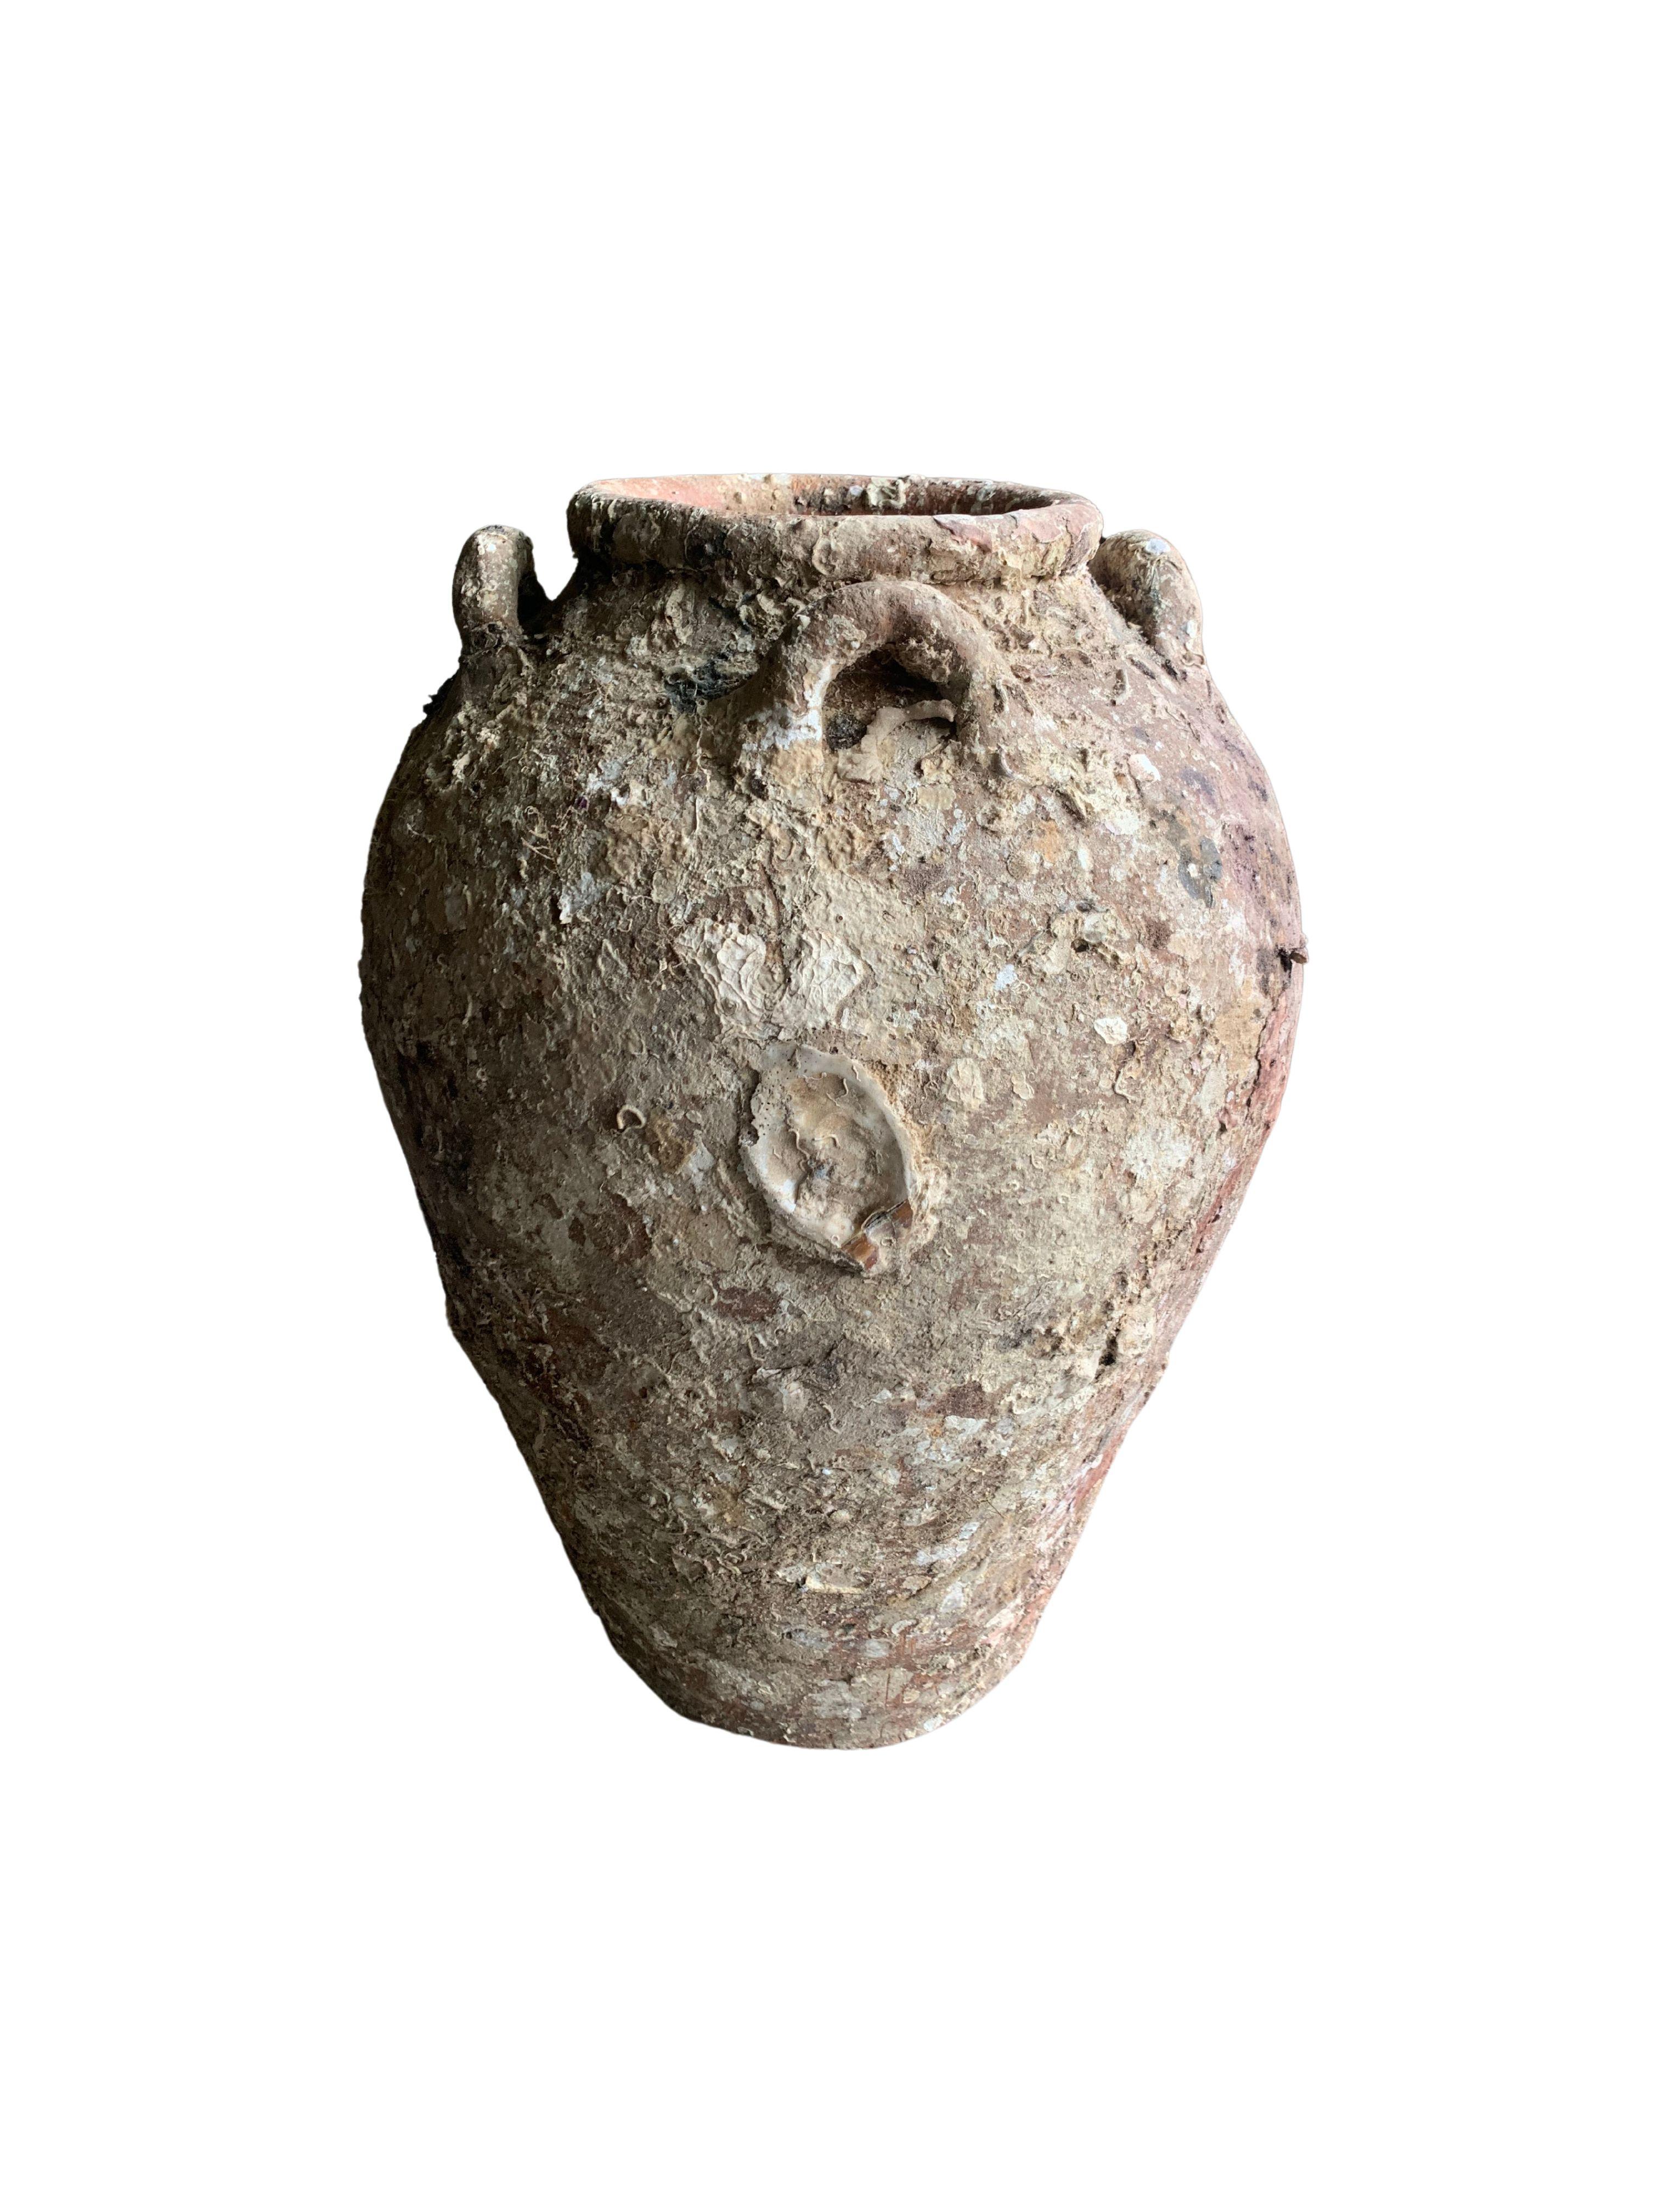 A wonderful example of a 19th century Sawankhalok jar from a Shipwreck off the Coast of the Indonesian Island of Batam. Batam was one of the most substantial and influential ports in the South China Sea where an abundance of trade was conducted.